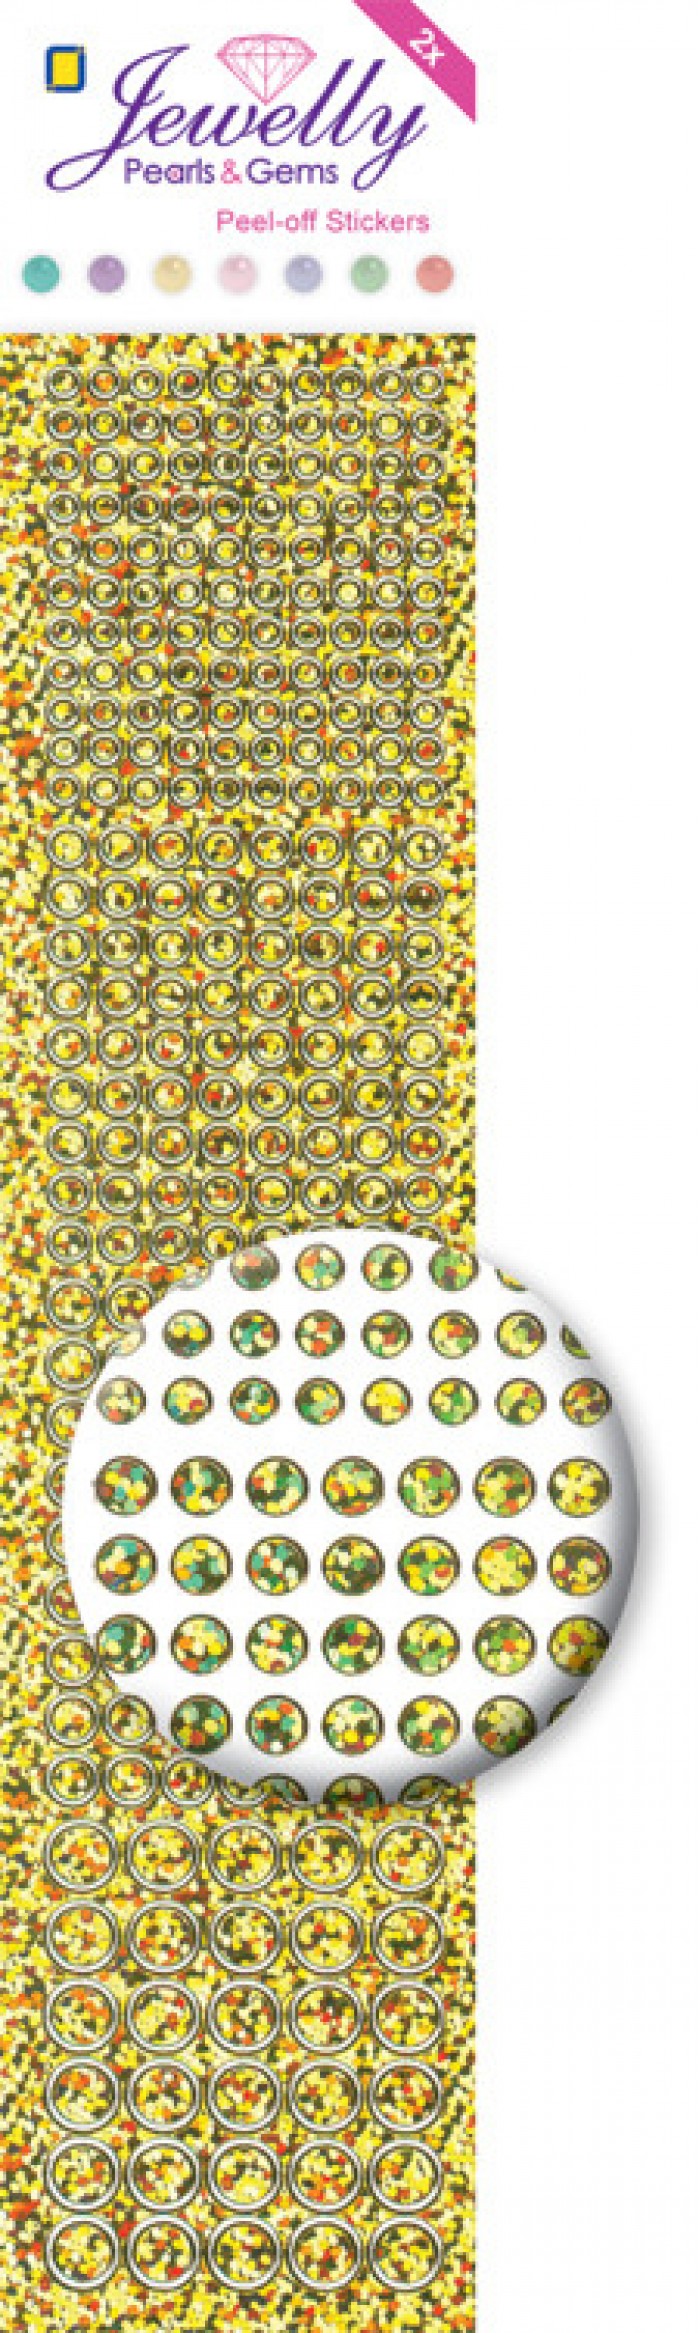 Jewelly Pearls & Gems Dots Diamond Gold, 2 sheets